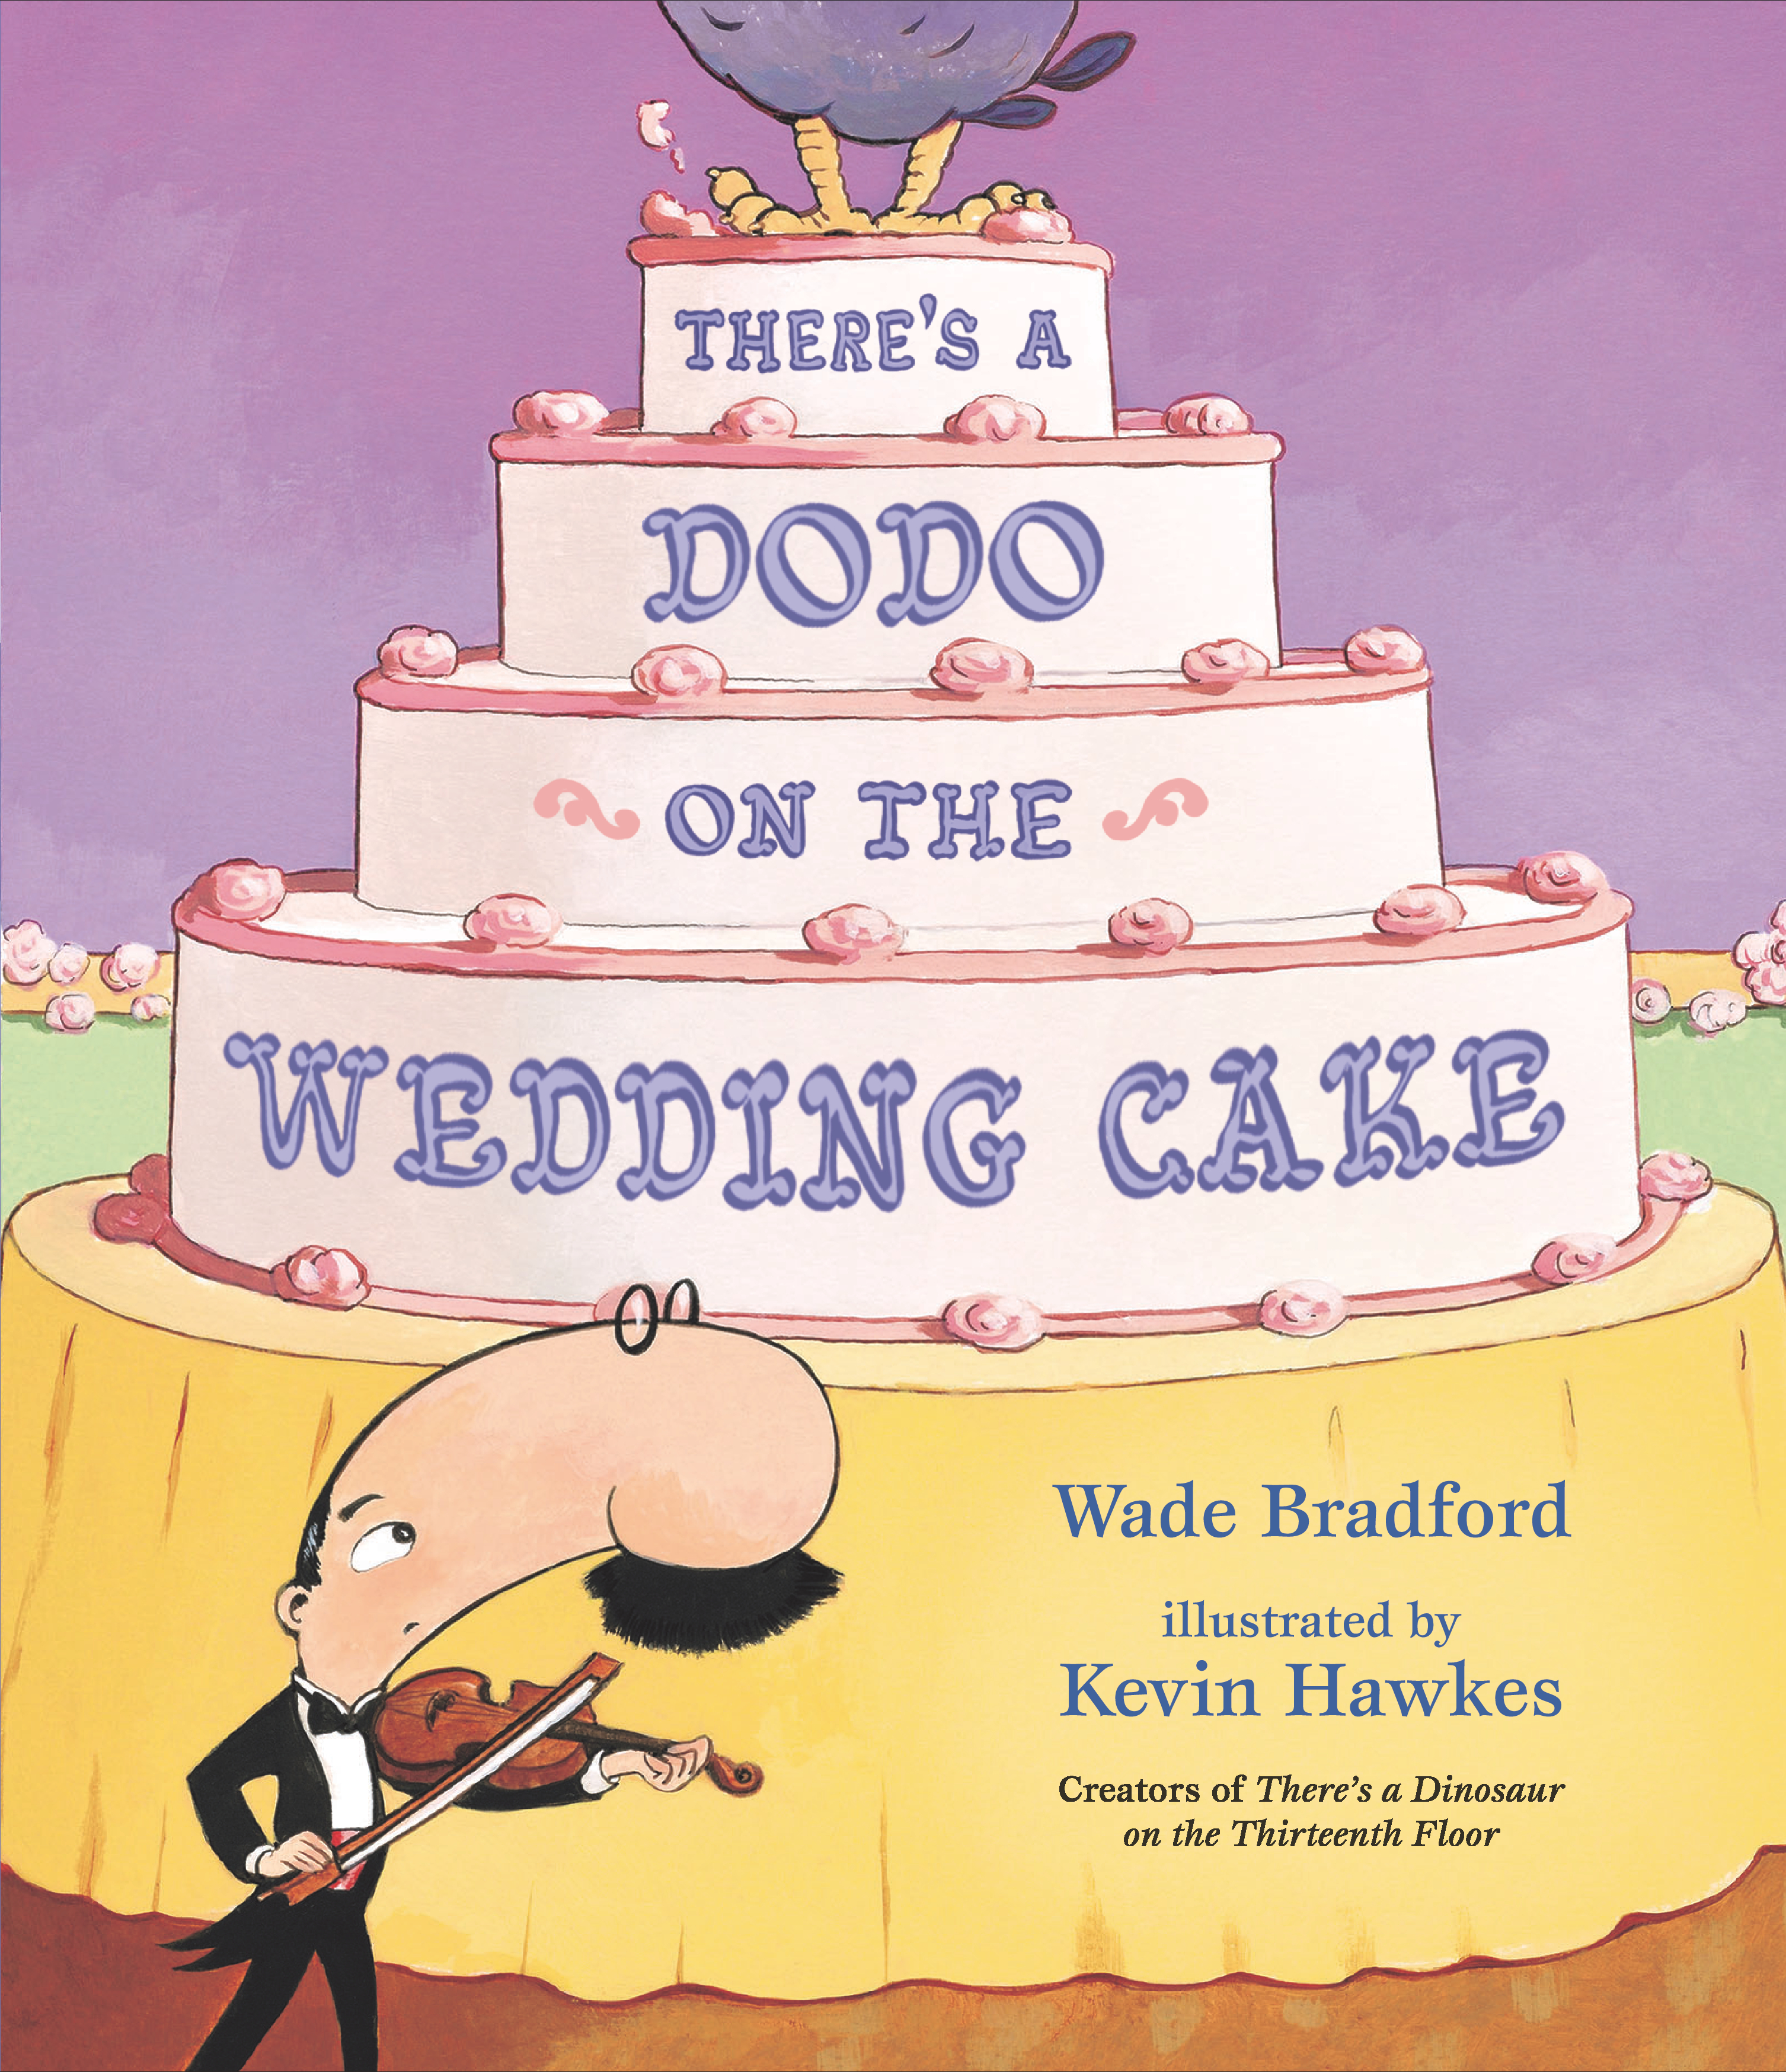 There-s-a-Dodo-on-the-Wedding-Cake